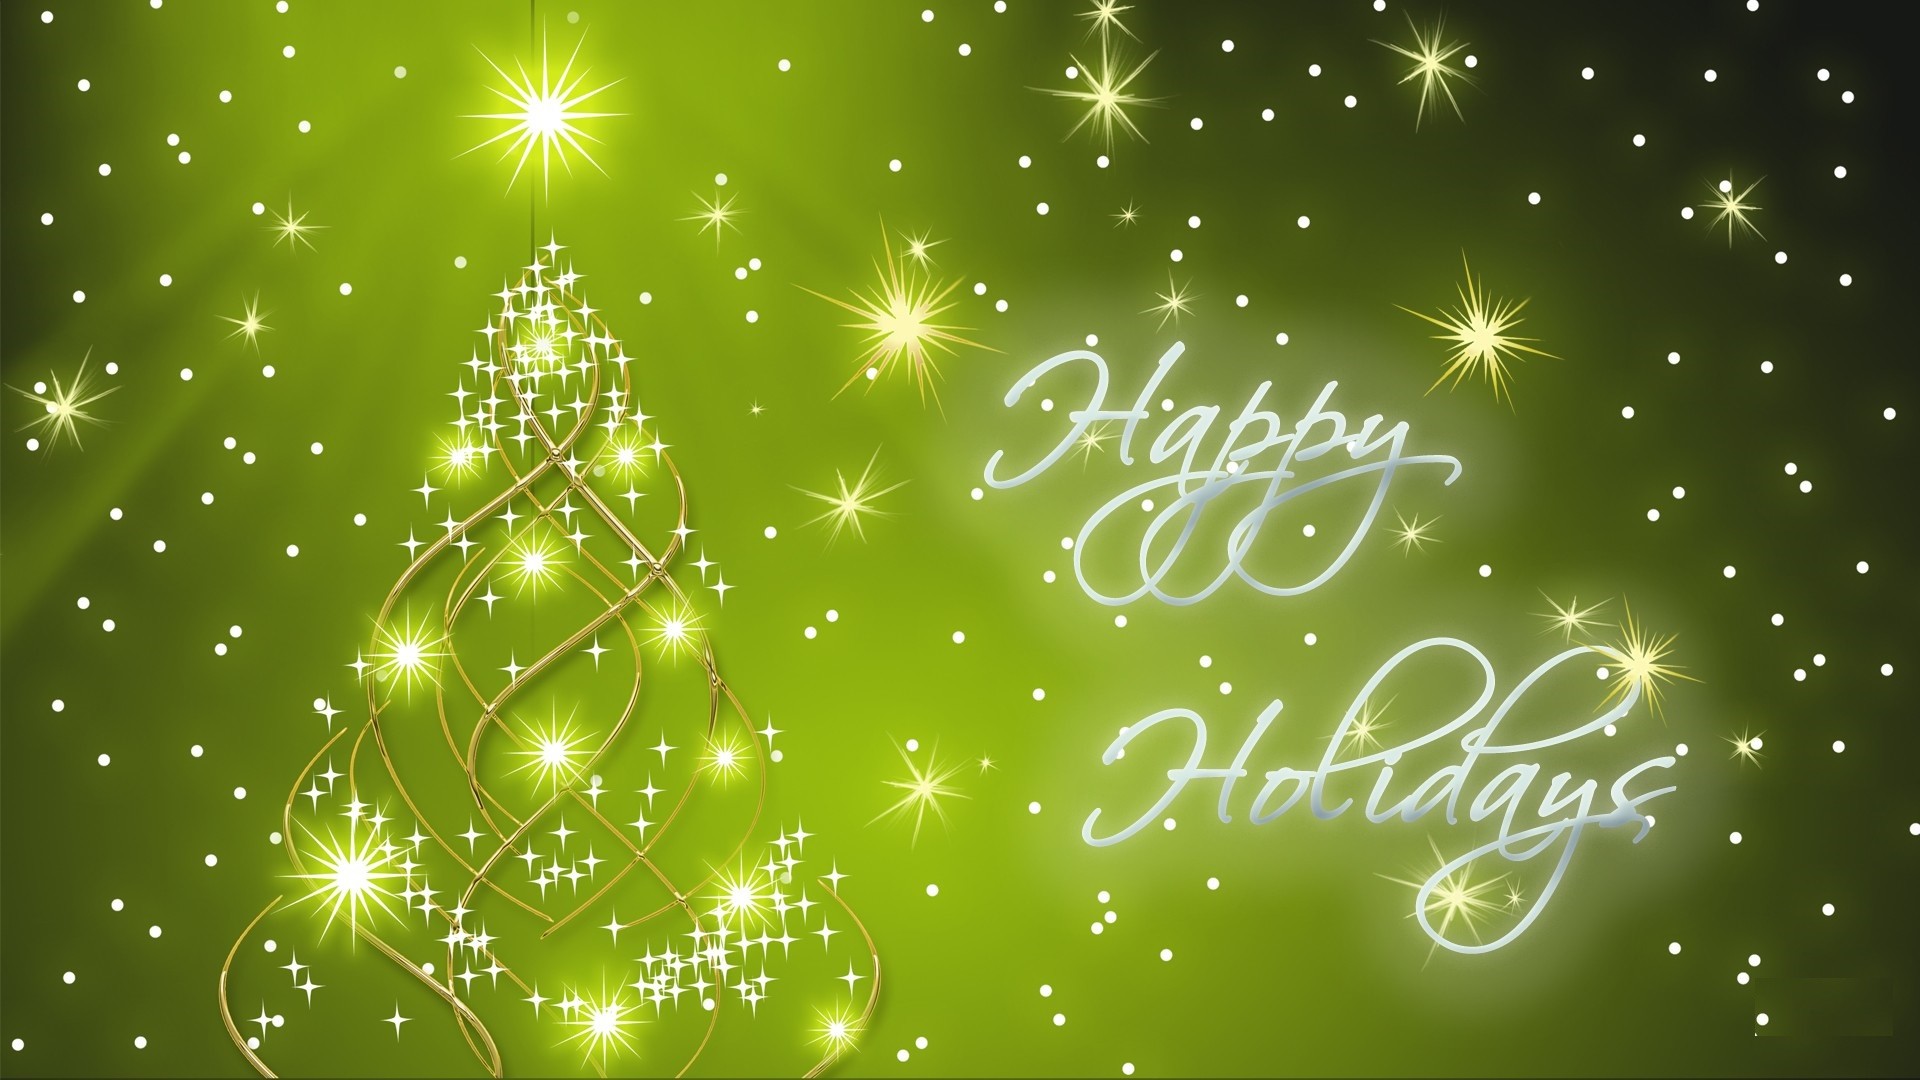 1920x1080 Happy holiday wallpapers HD pictures images photos.